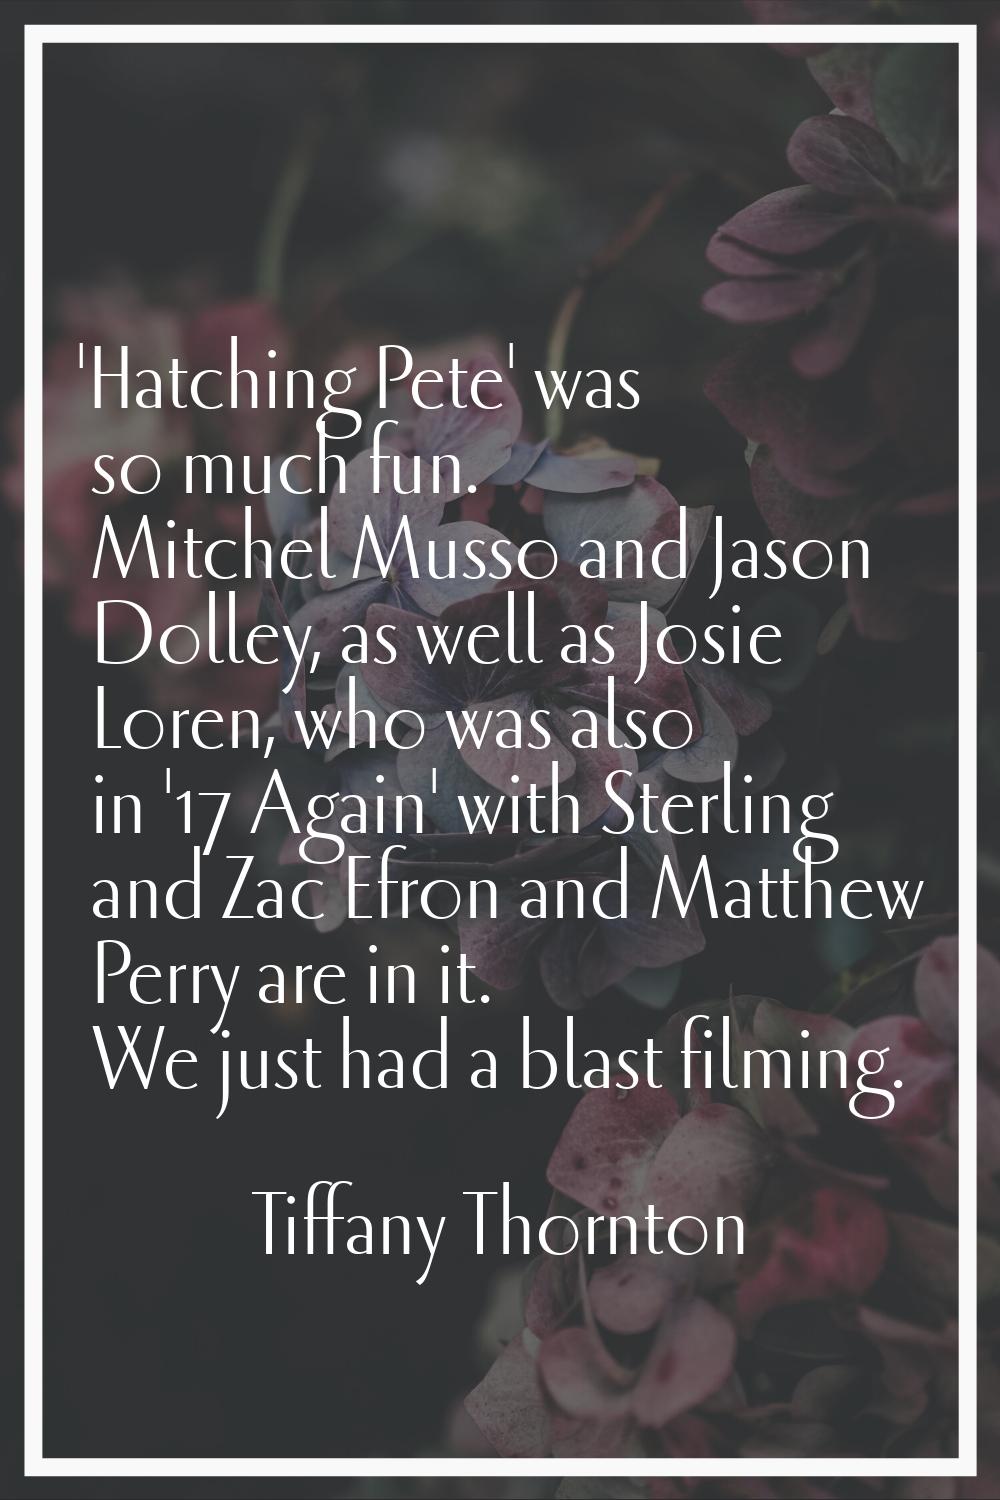 'Hatching Pete' was so much fun. Mitchel Musso and Jason Dolley, as well as Josie Loren, who was al